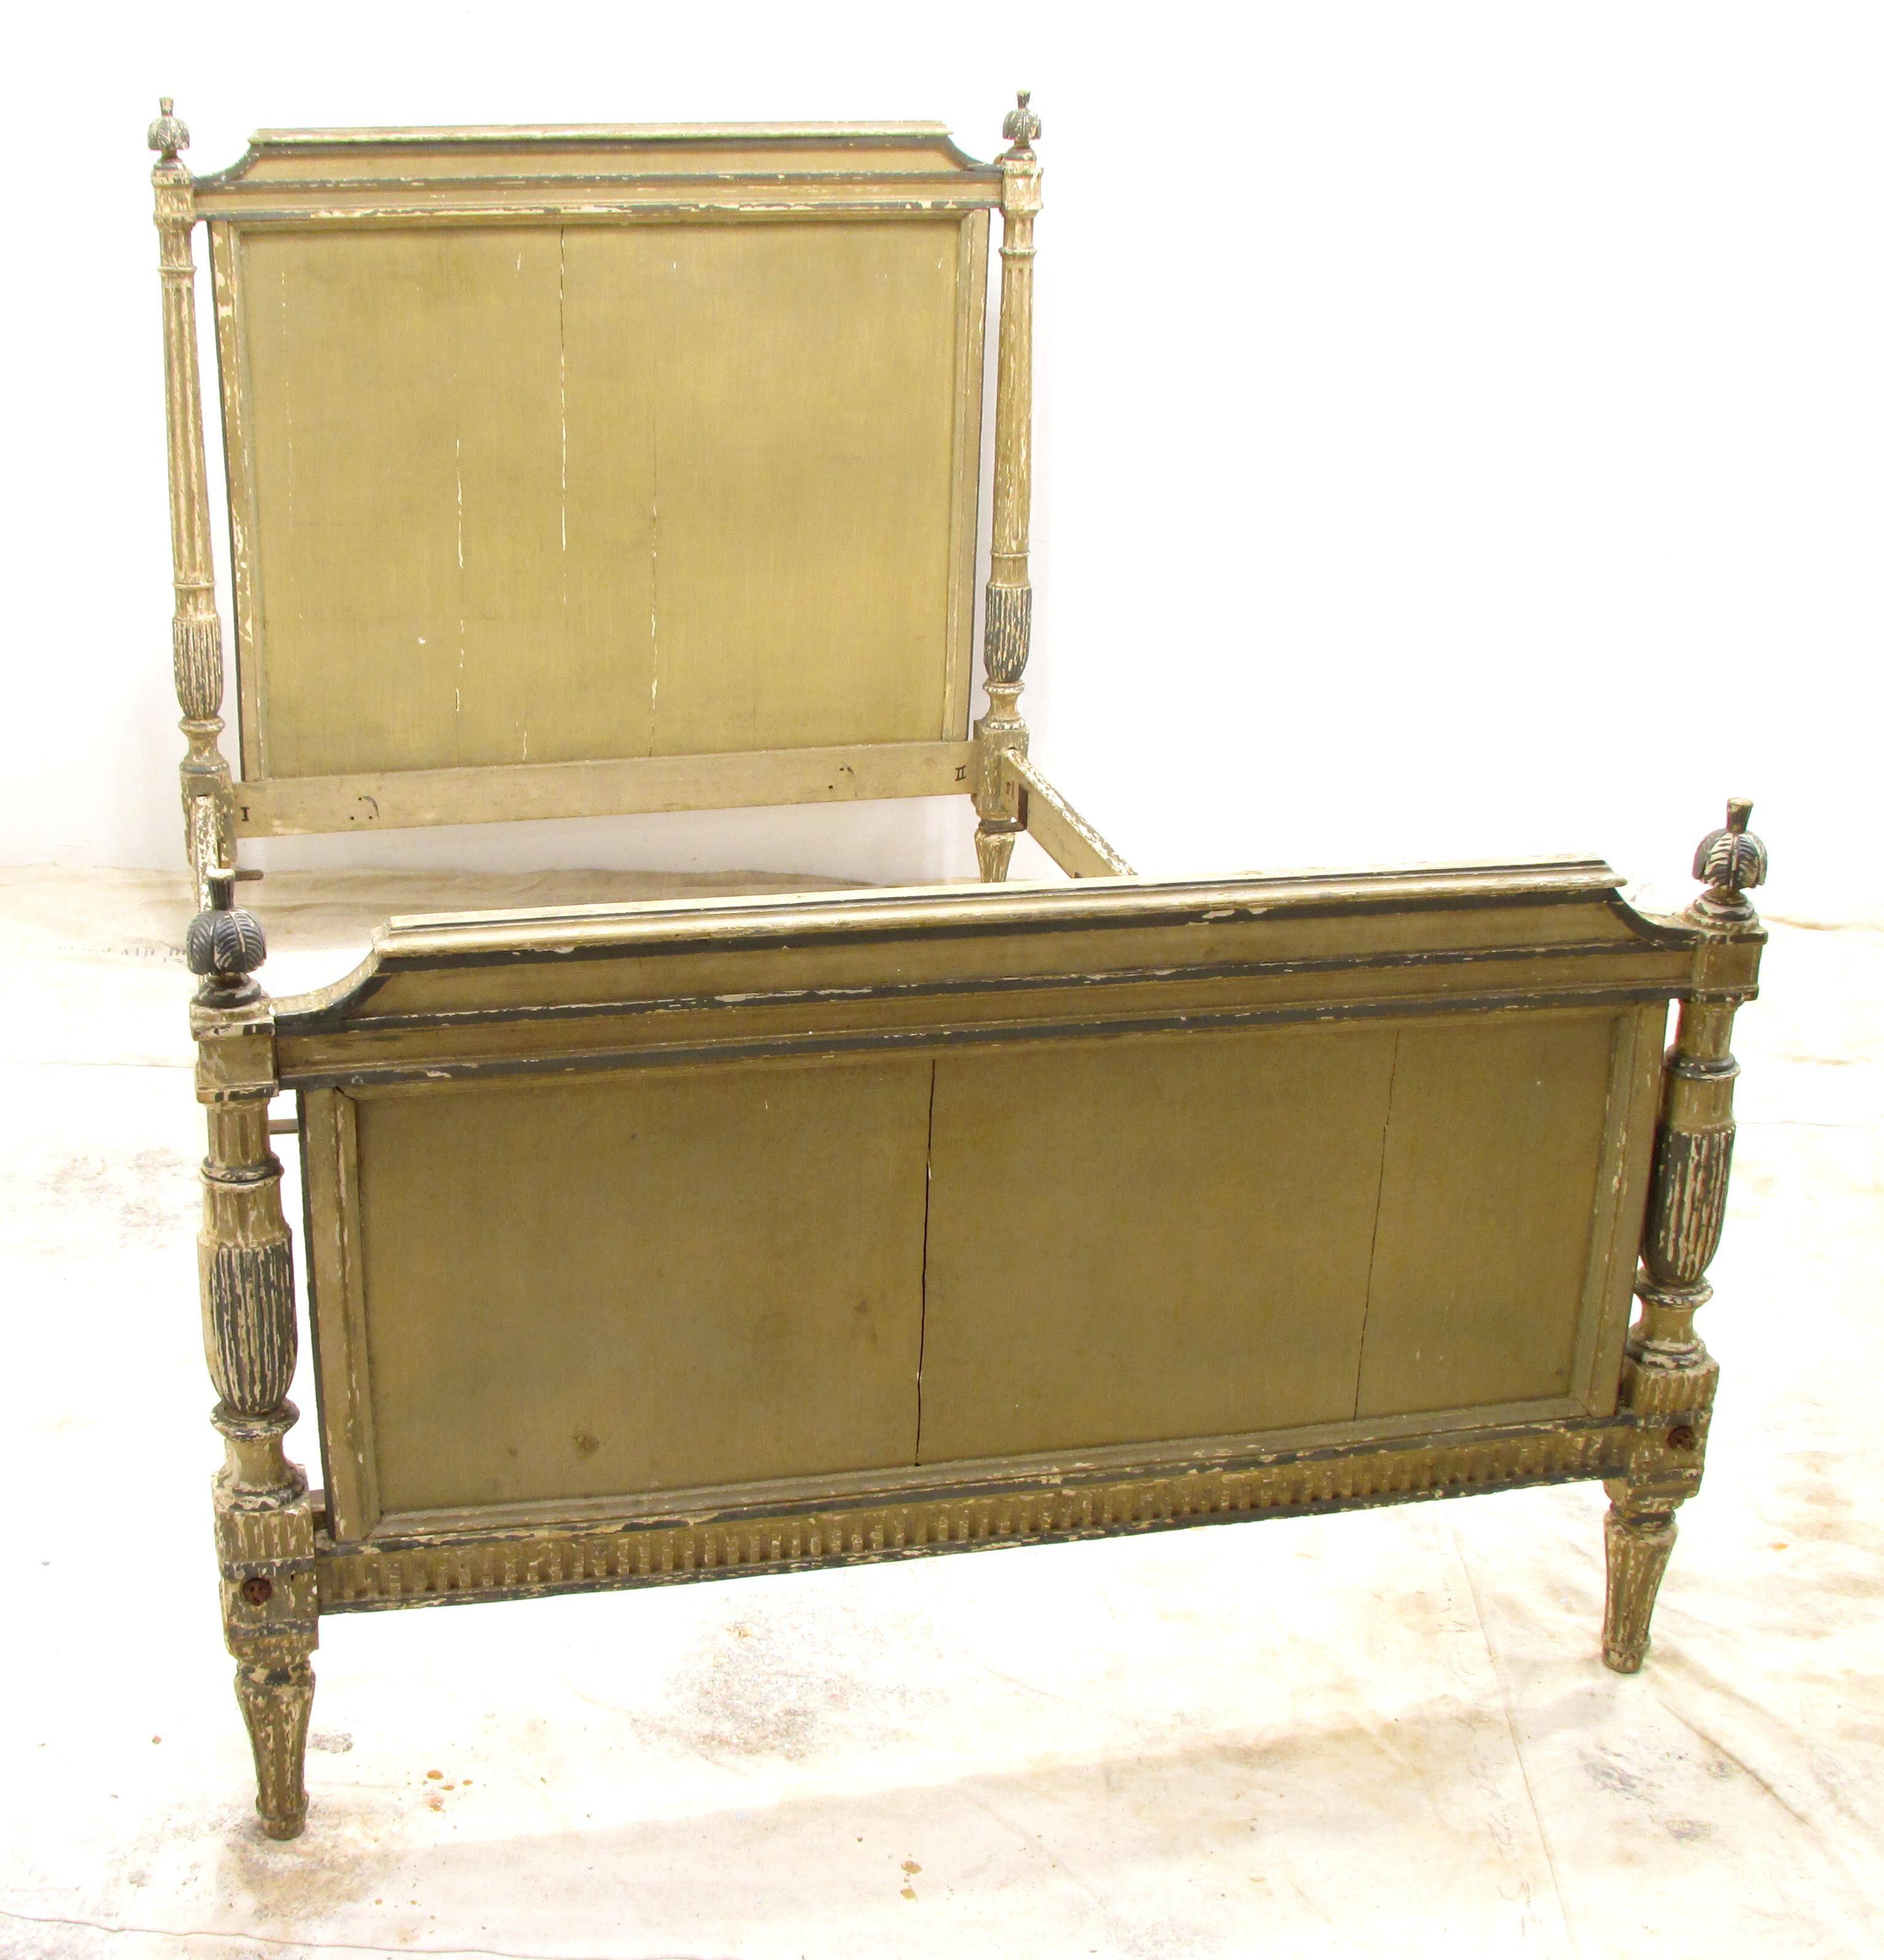 French Louis XVI  directoire bed "small double" size with original green paint with detail carved finials and turned receded columns and legs and fluted rails dates from early 19th century the rails have been extended to accommodate a 3/4